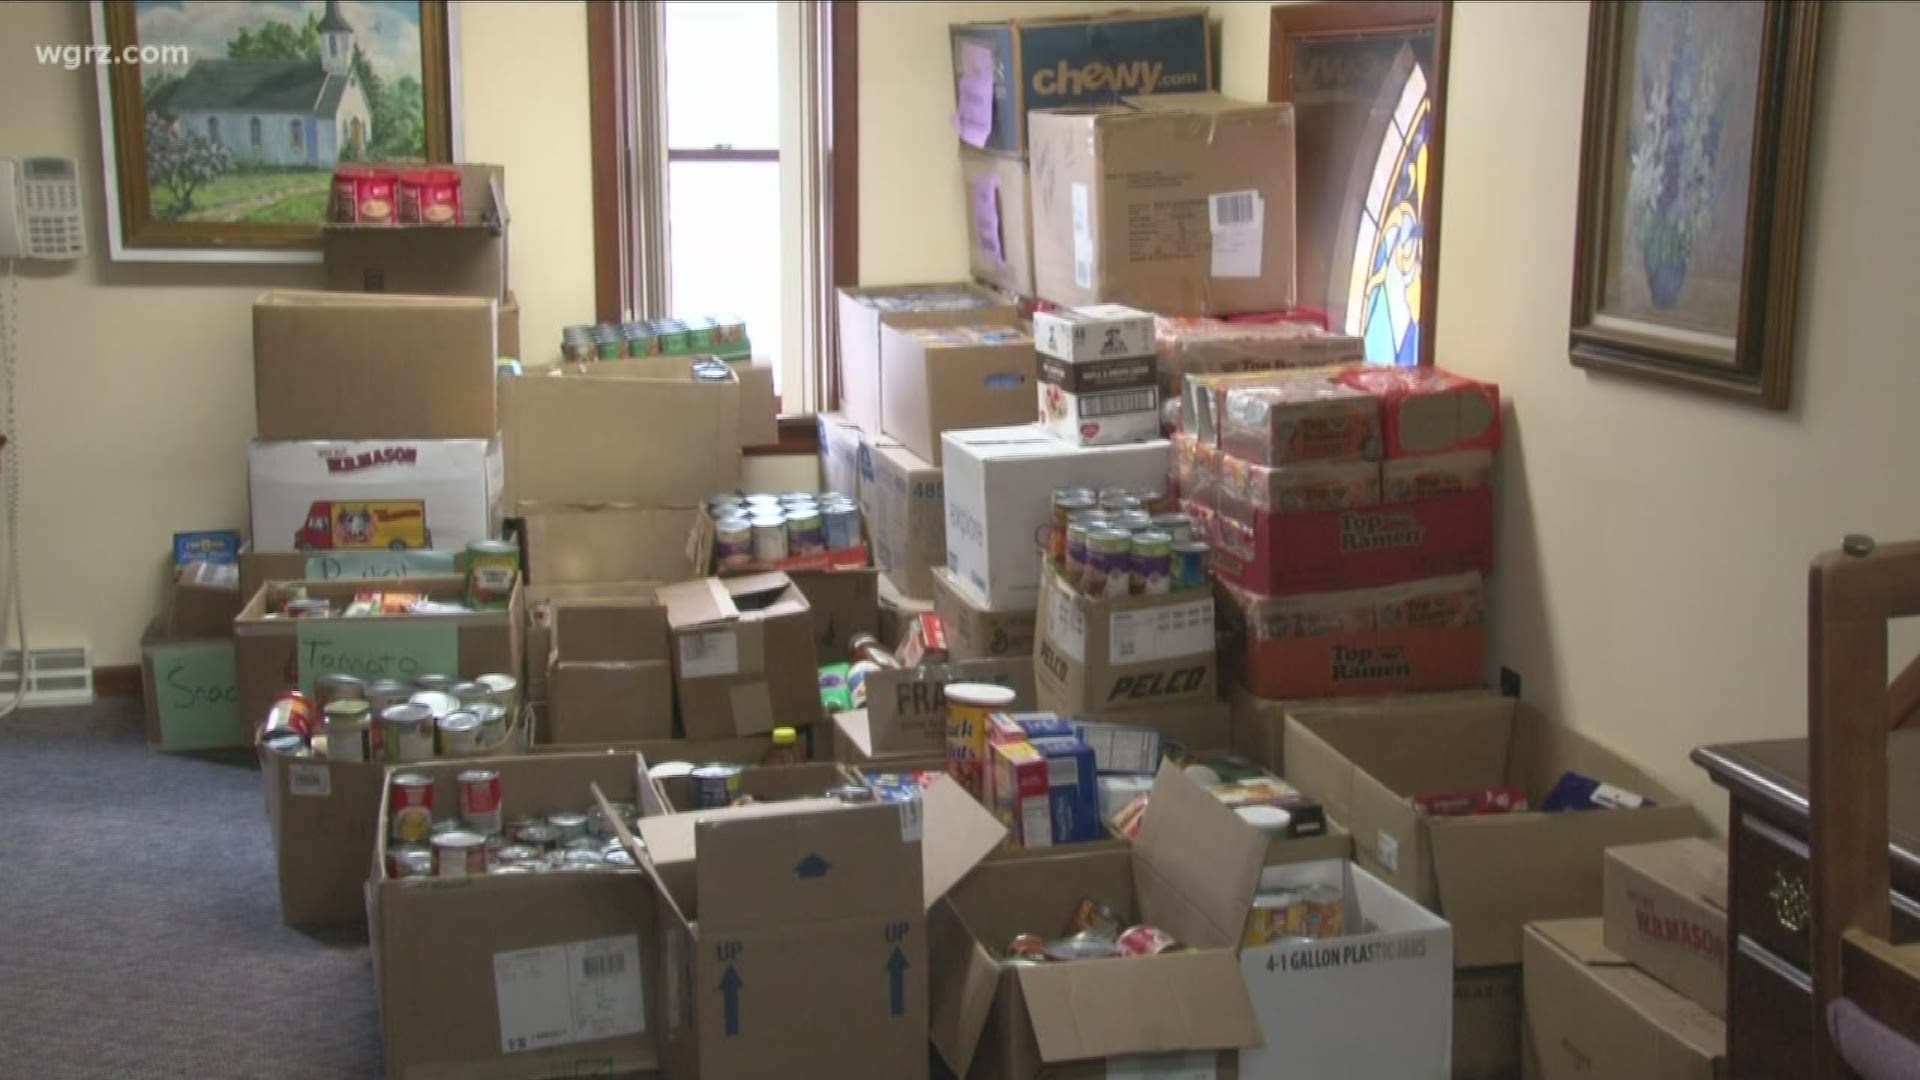 The school and community are small, but their giving spirit is huge. That generosity is making a big difference for one local food pantry.